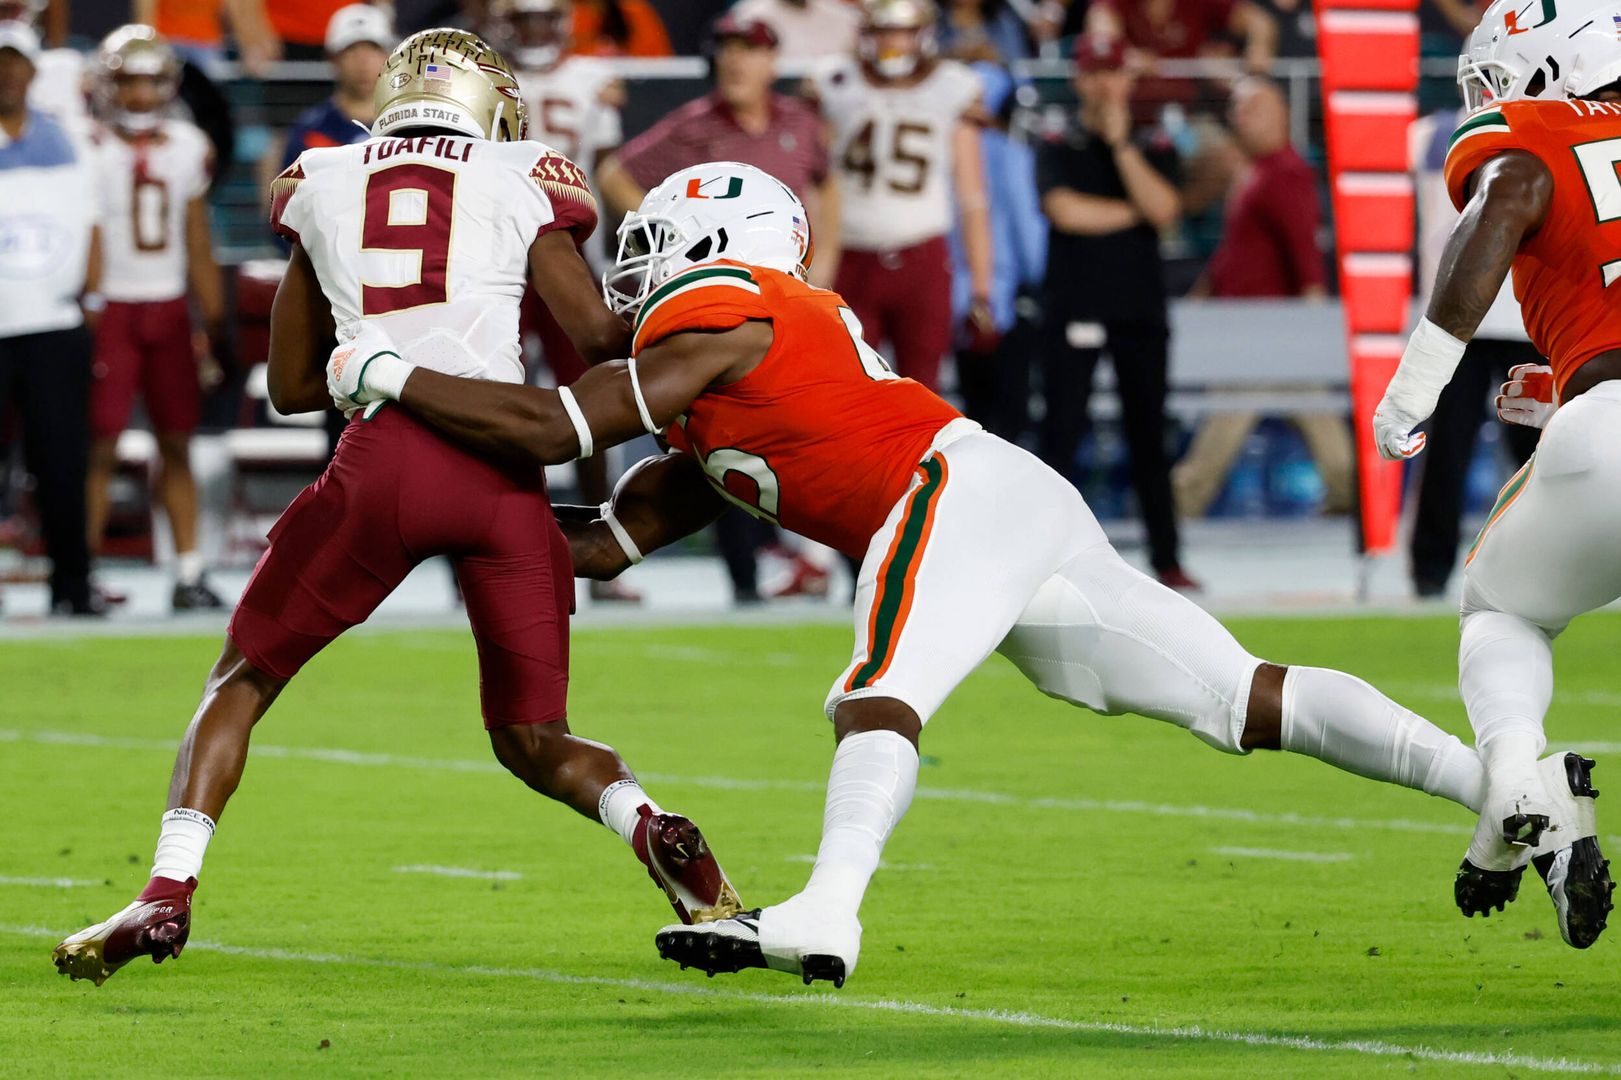 Takeaways from Miami's Game Against Florida State